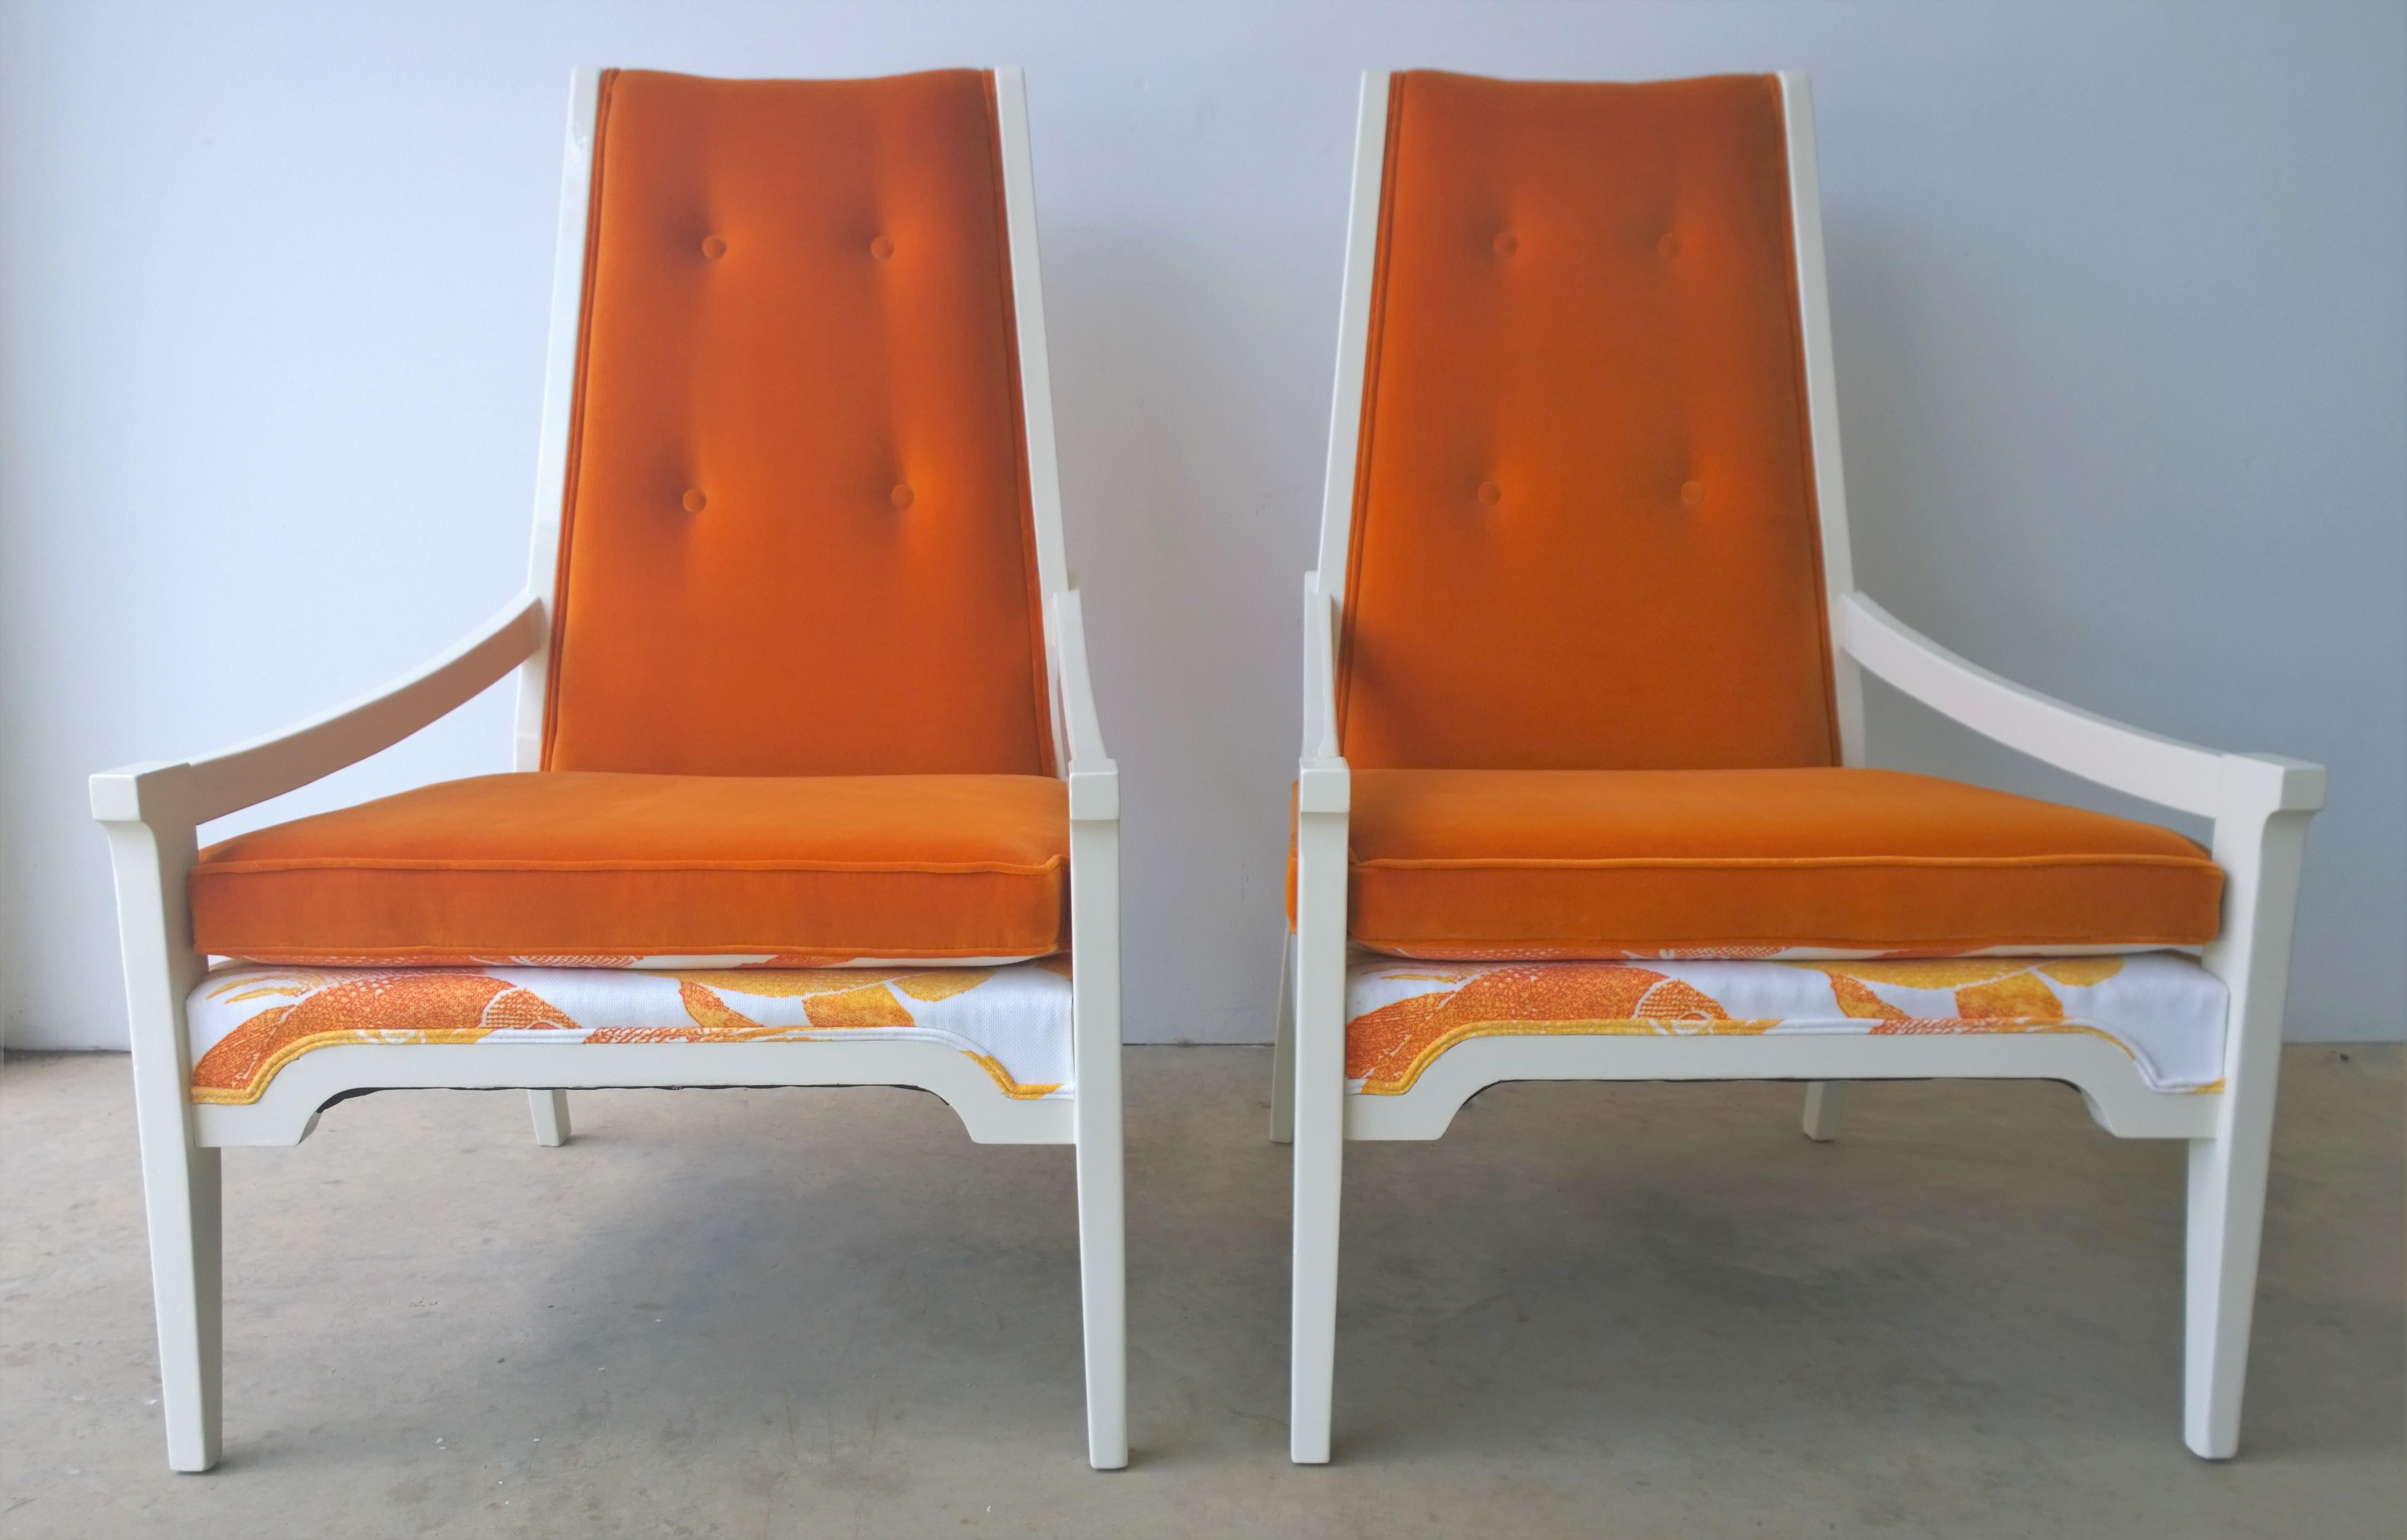 Offered is a pair of Mid-Century Modern beyond gorgeous, whimsical yet very elegant, white lacquered pair of armchairs in the manner of T.H. Robsjohn-Gibbings. Stunning in a button tufted, persimmon orange, lush velvet with Japanese Koi in tangerine